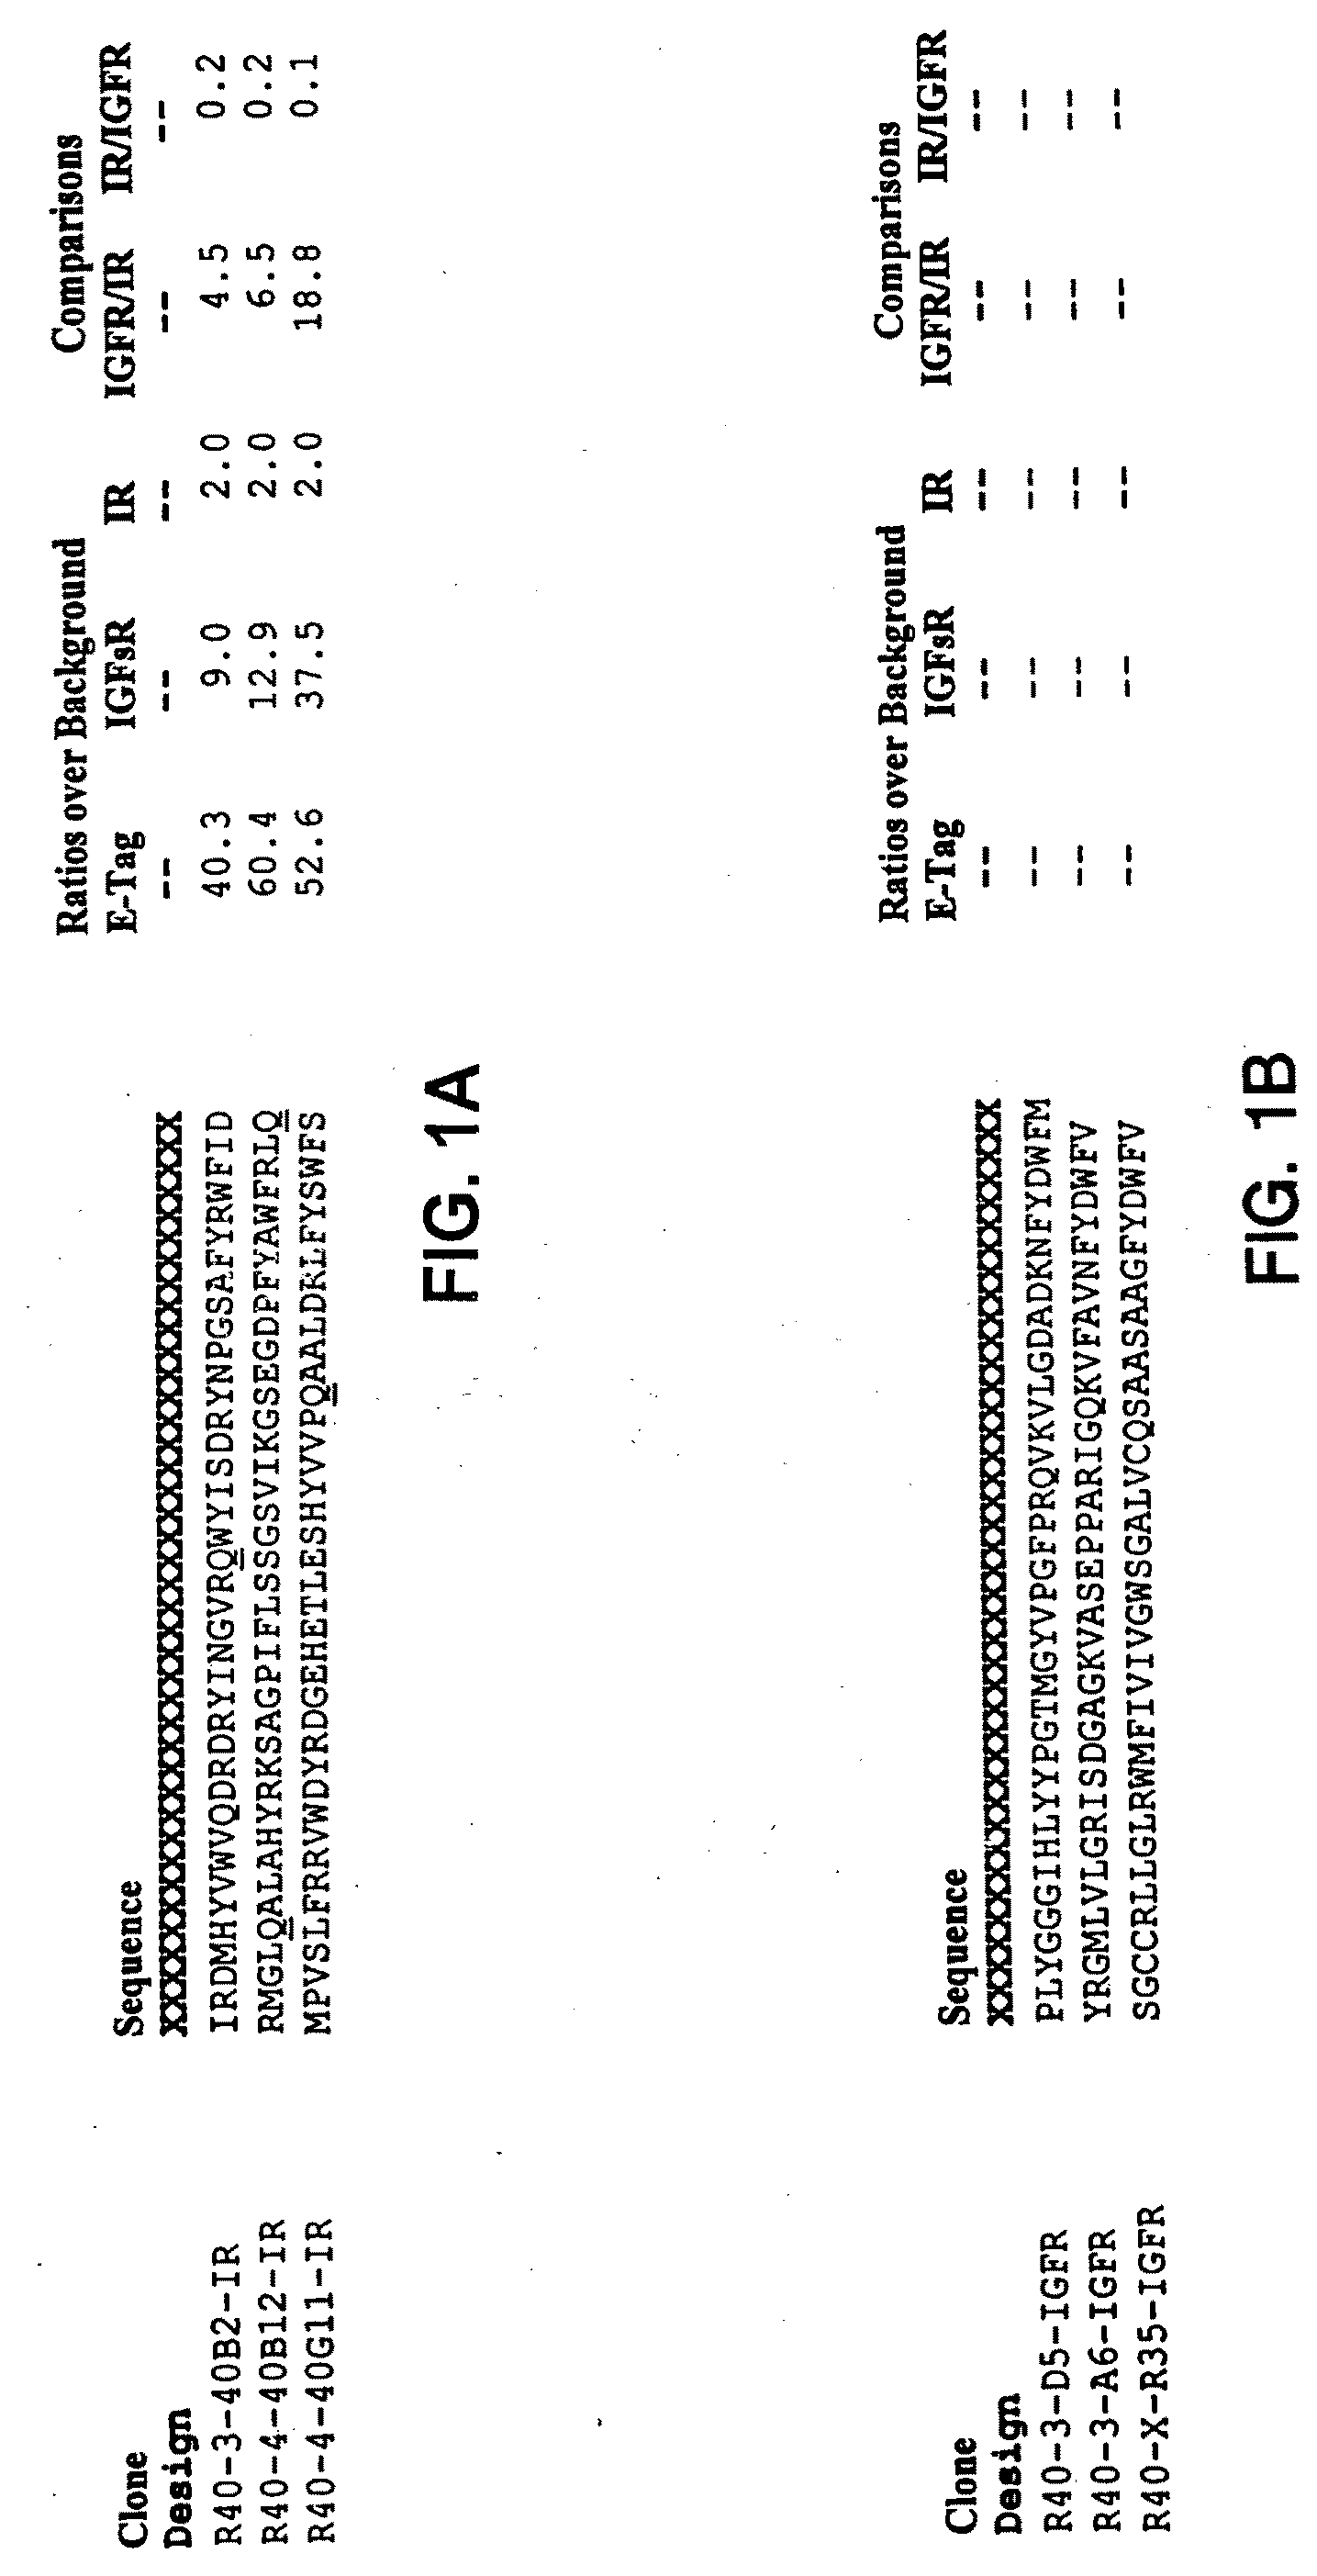 Insulin and IGF-1 Receptor Agonists and Antagonists